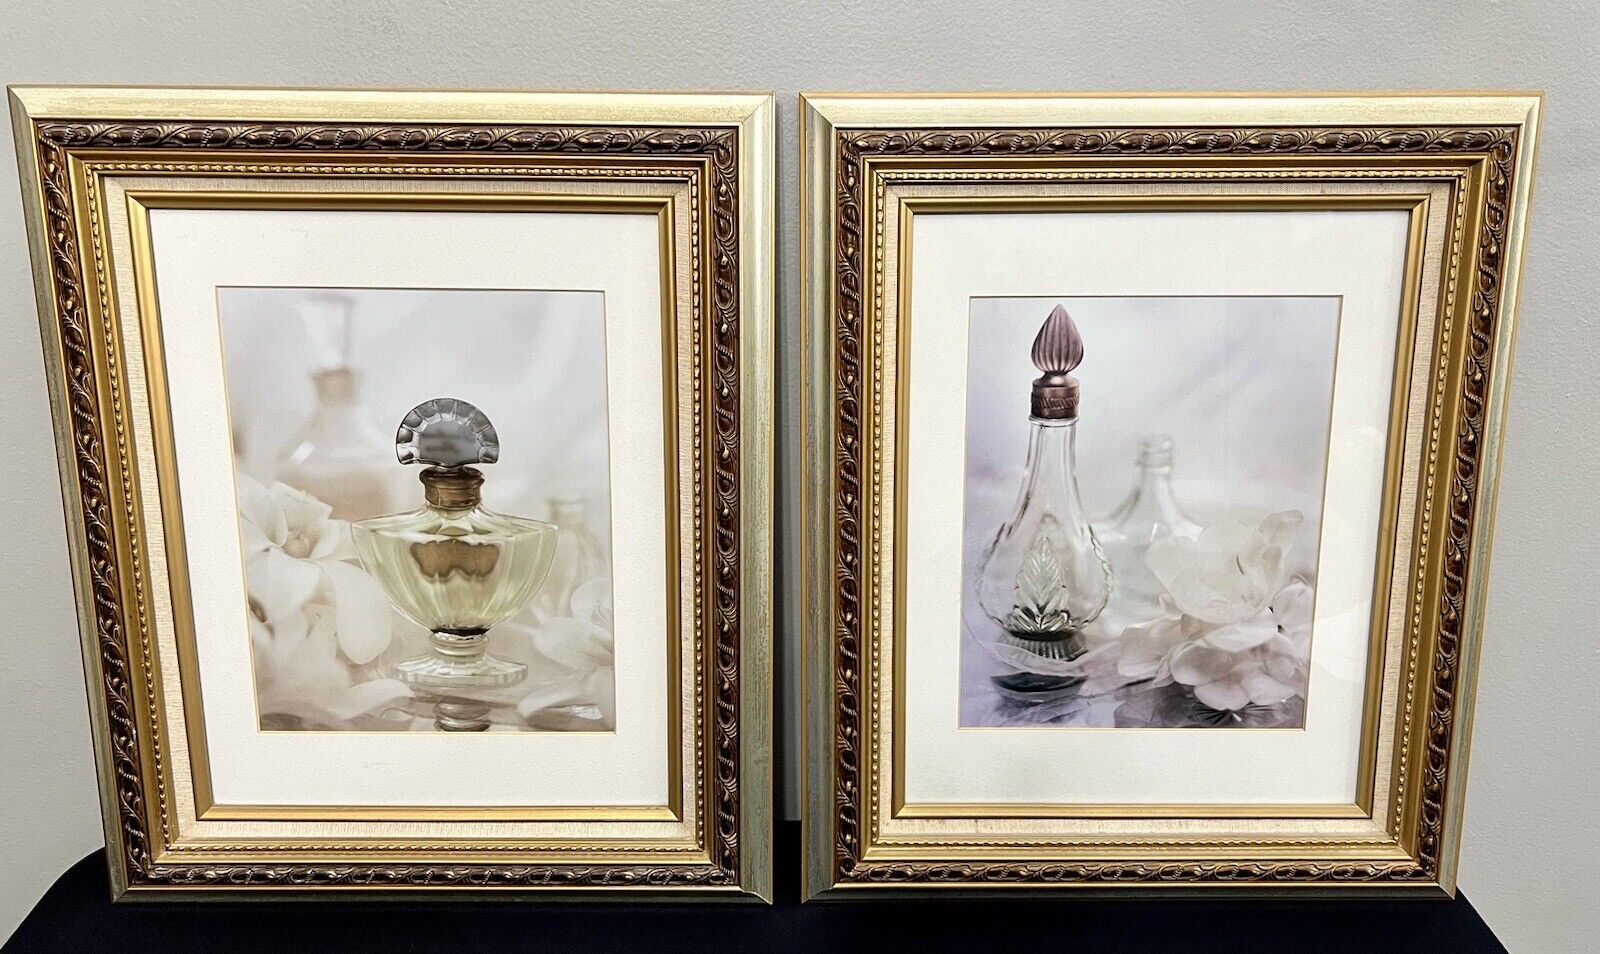 2 Gorgeous Gold French Provincial Framed Vintage Perfume Bottles Pictured